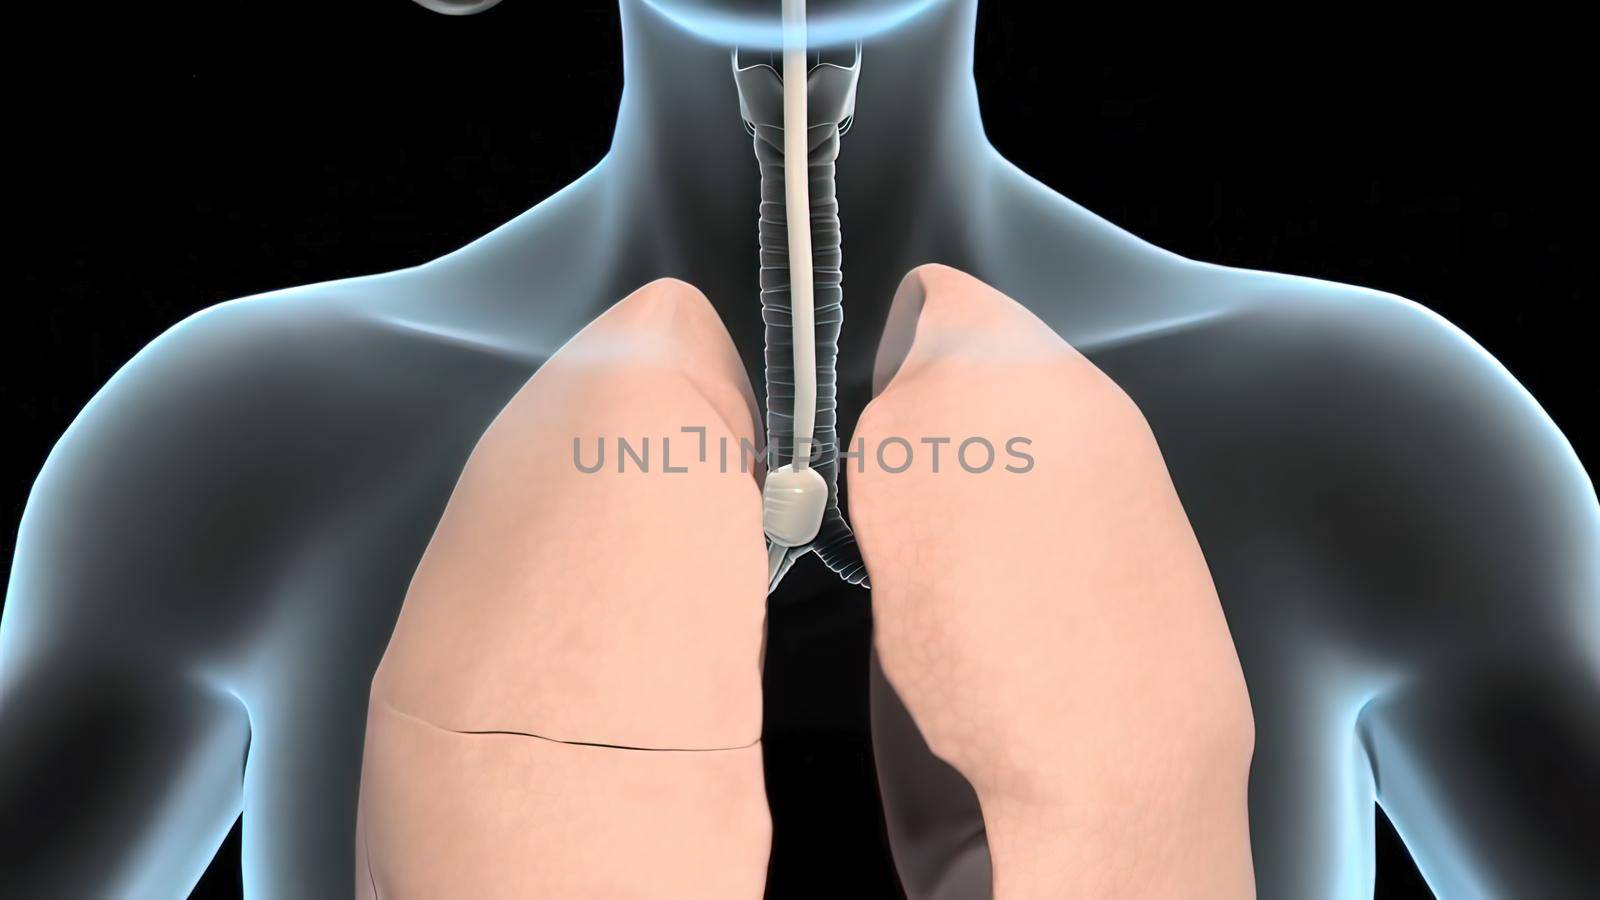 Intubation is the process of advancing a thin tube, called an endotracheal tube, from the mouth to the respiratory tract. 3D illustration